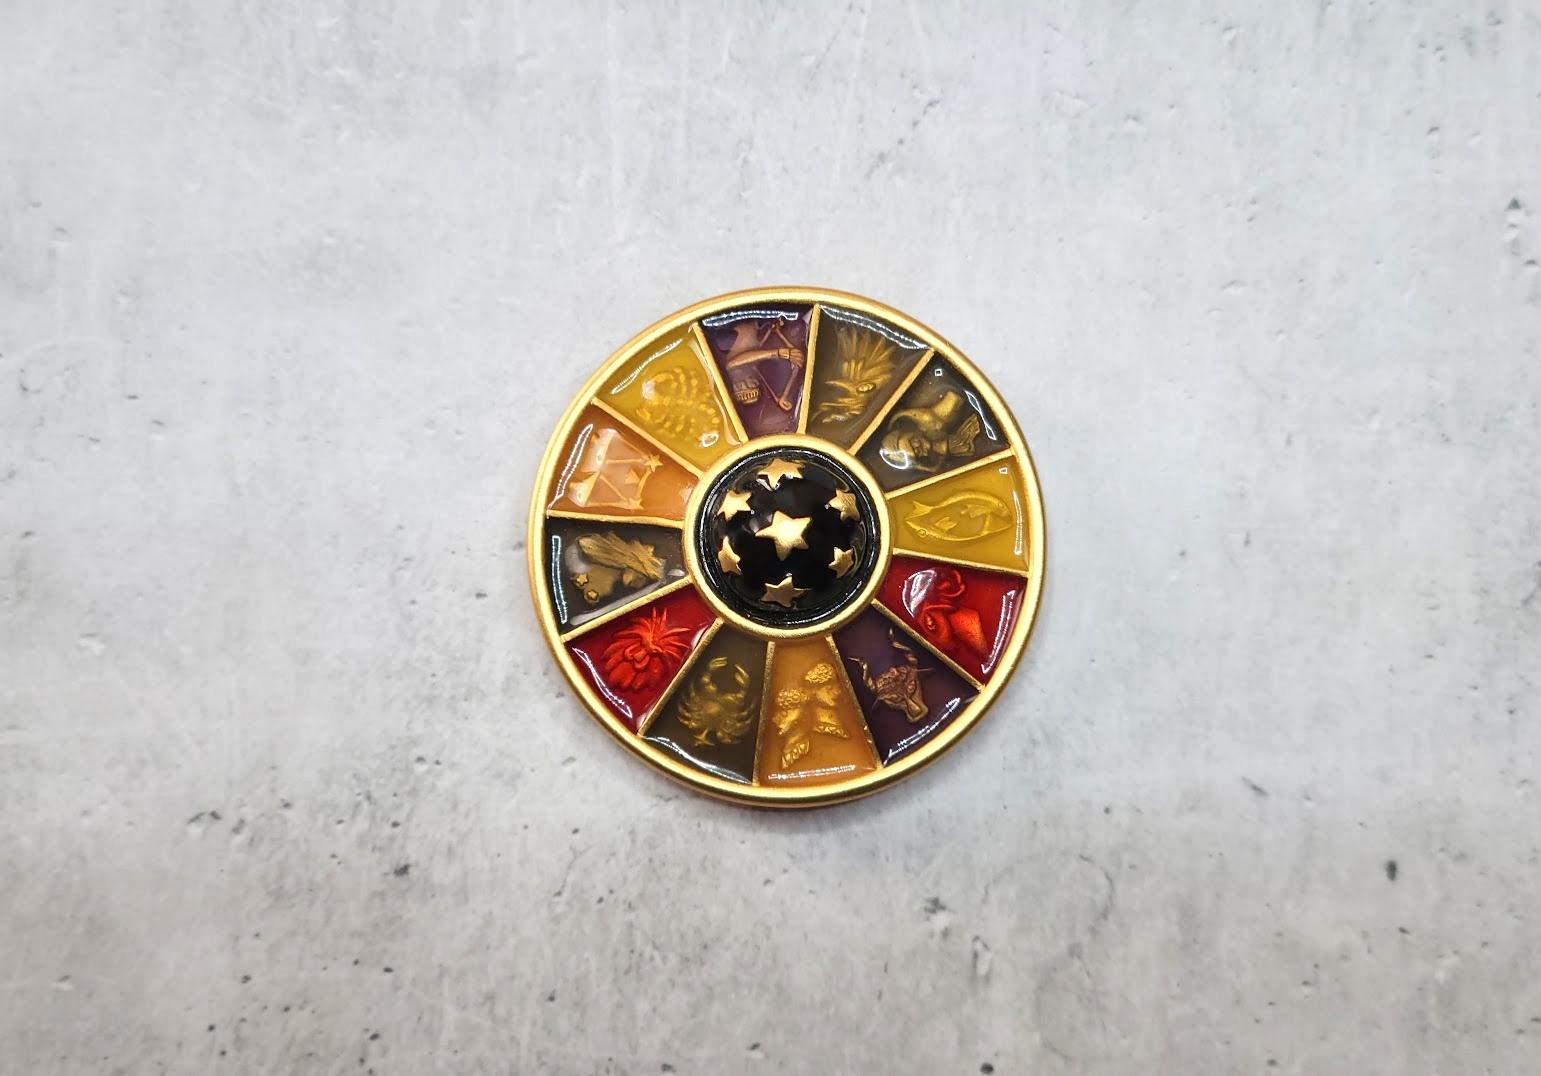 Introducing a stunning vintage gold-tone enamel brooch pendant designed by Bob Mackie, the renowned fashion icon behind the glamorous concert costumes worn by US Film stars such as Cher.

Measuring 2 inches in diameter (50 mm) and weighing 34.2